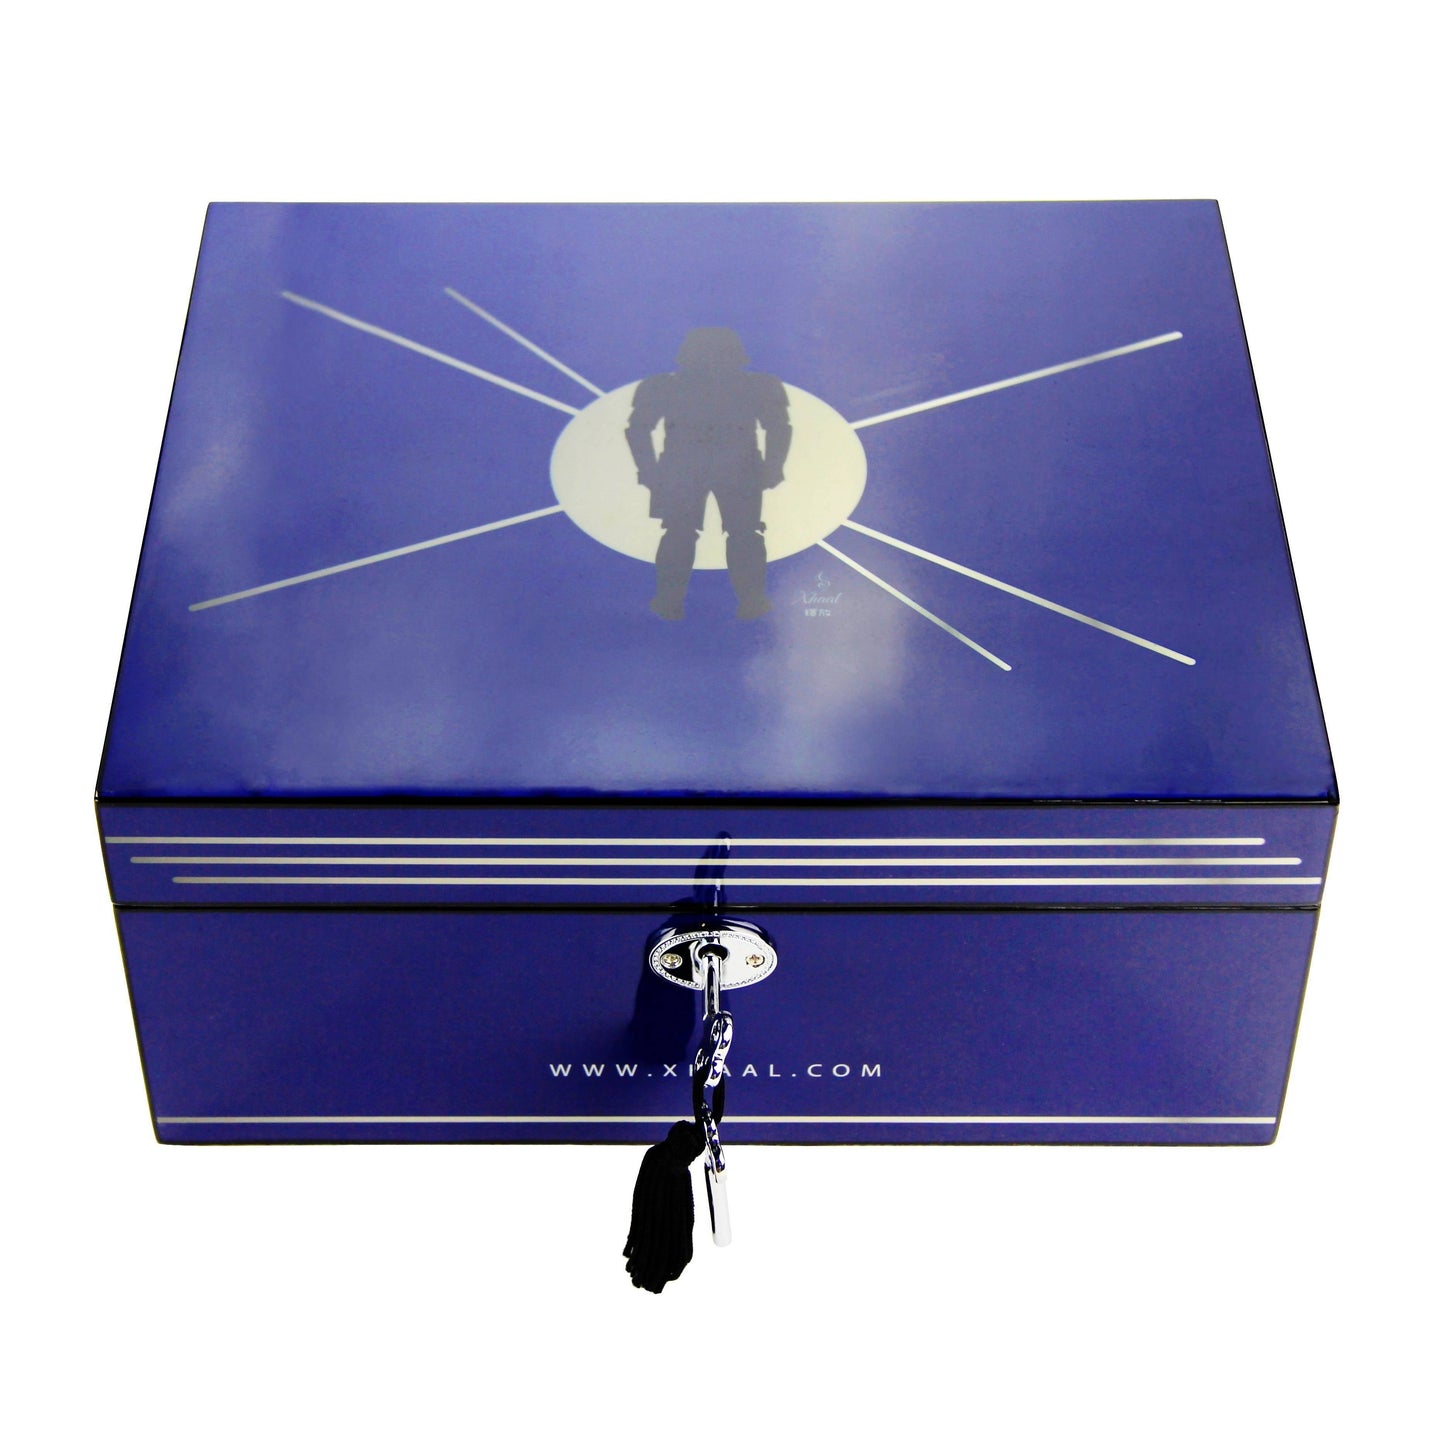 Fully Stocked Stylish Durable Blue Humidor Box Flower Power Packages 